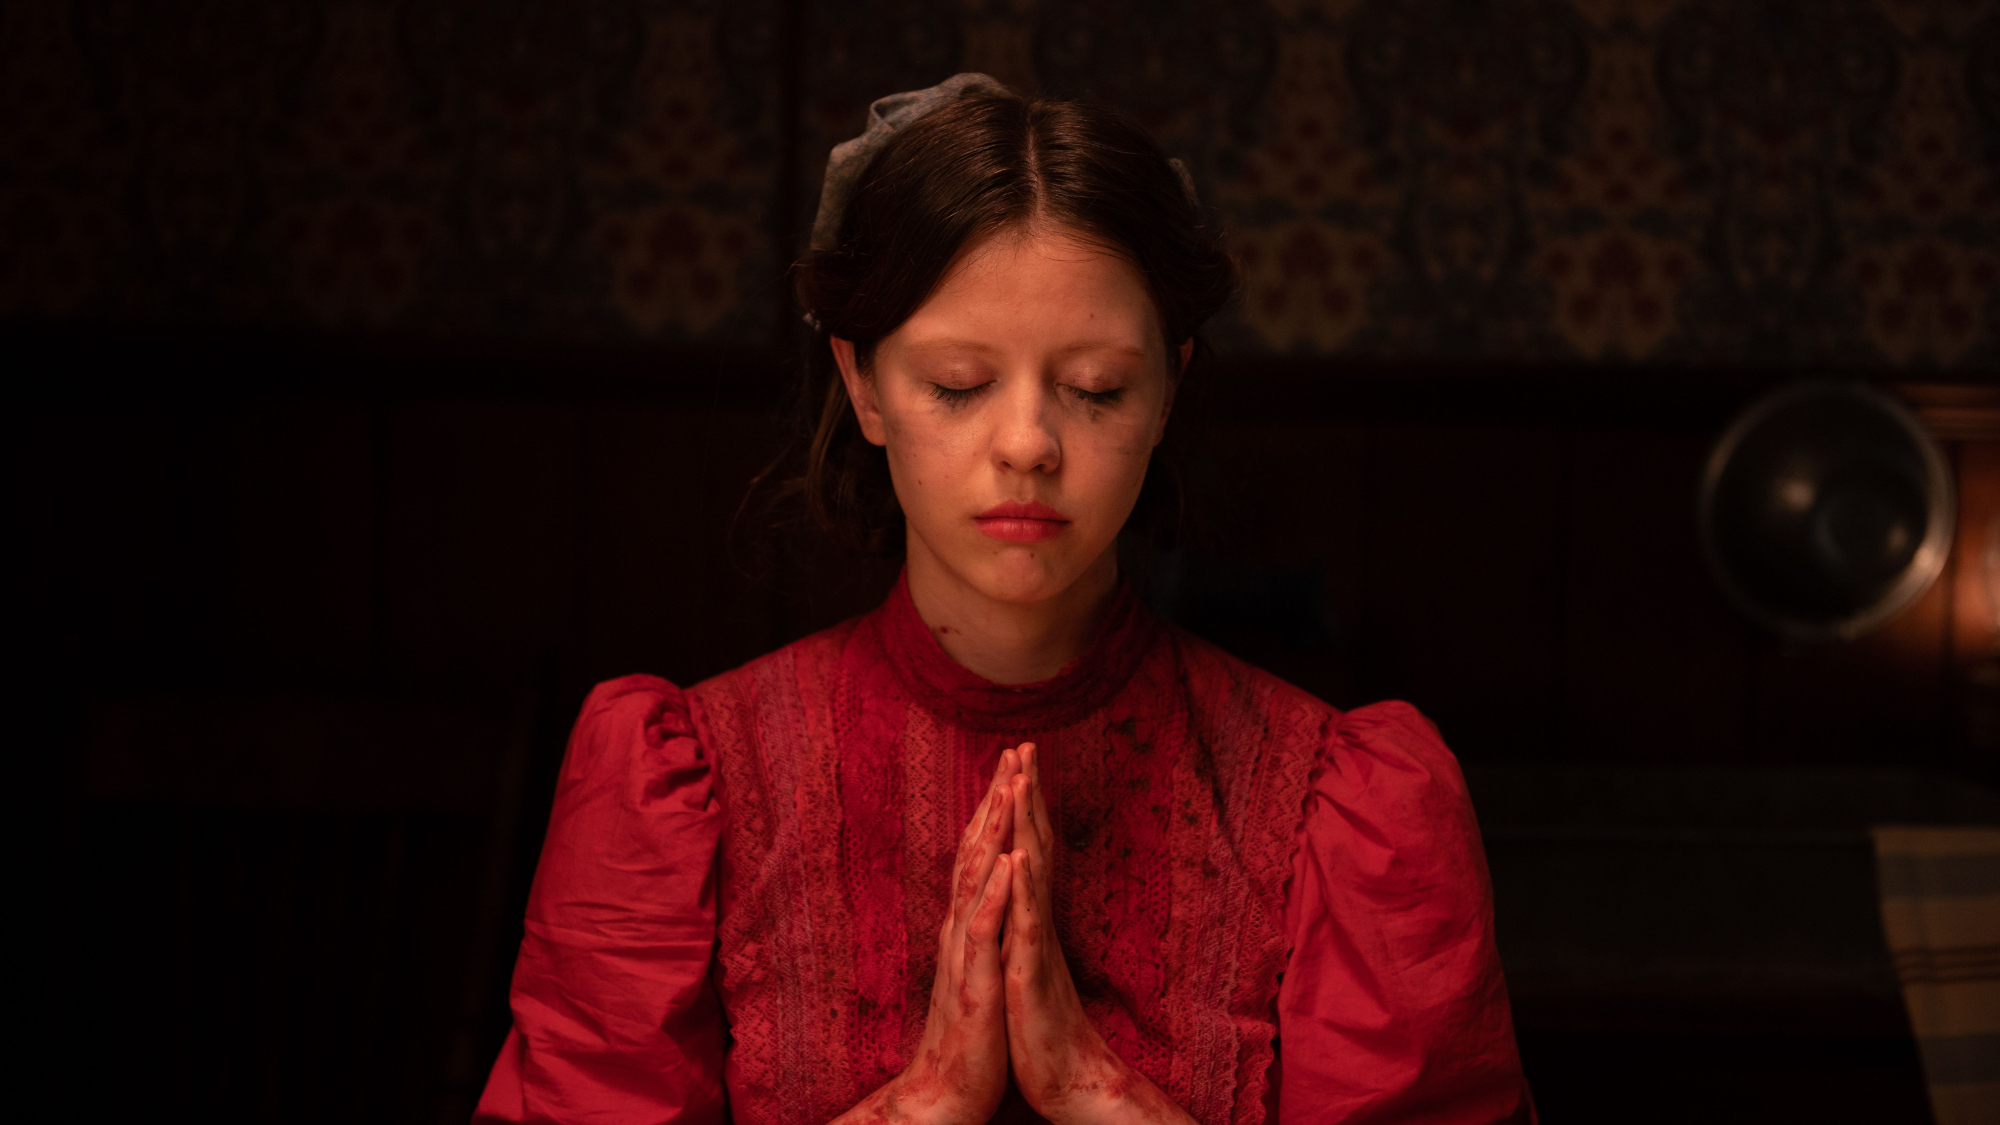 'Pearl' Mia Goth as Pearl holding her hands together to pray. She has her eyes closed, wearing a red dress, with her hands covered in blood.